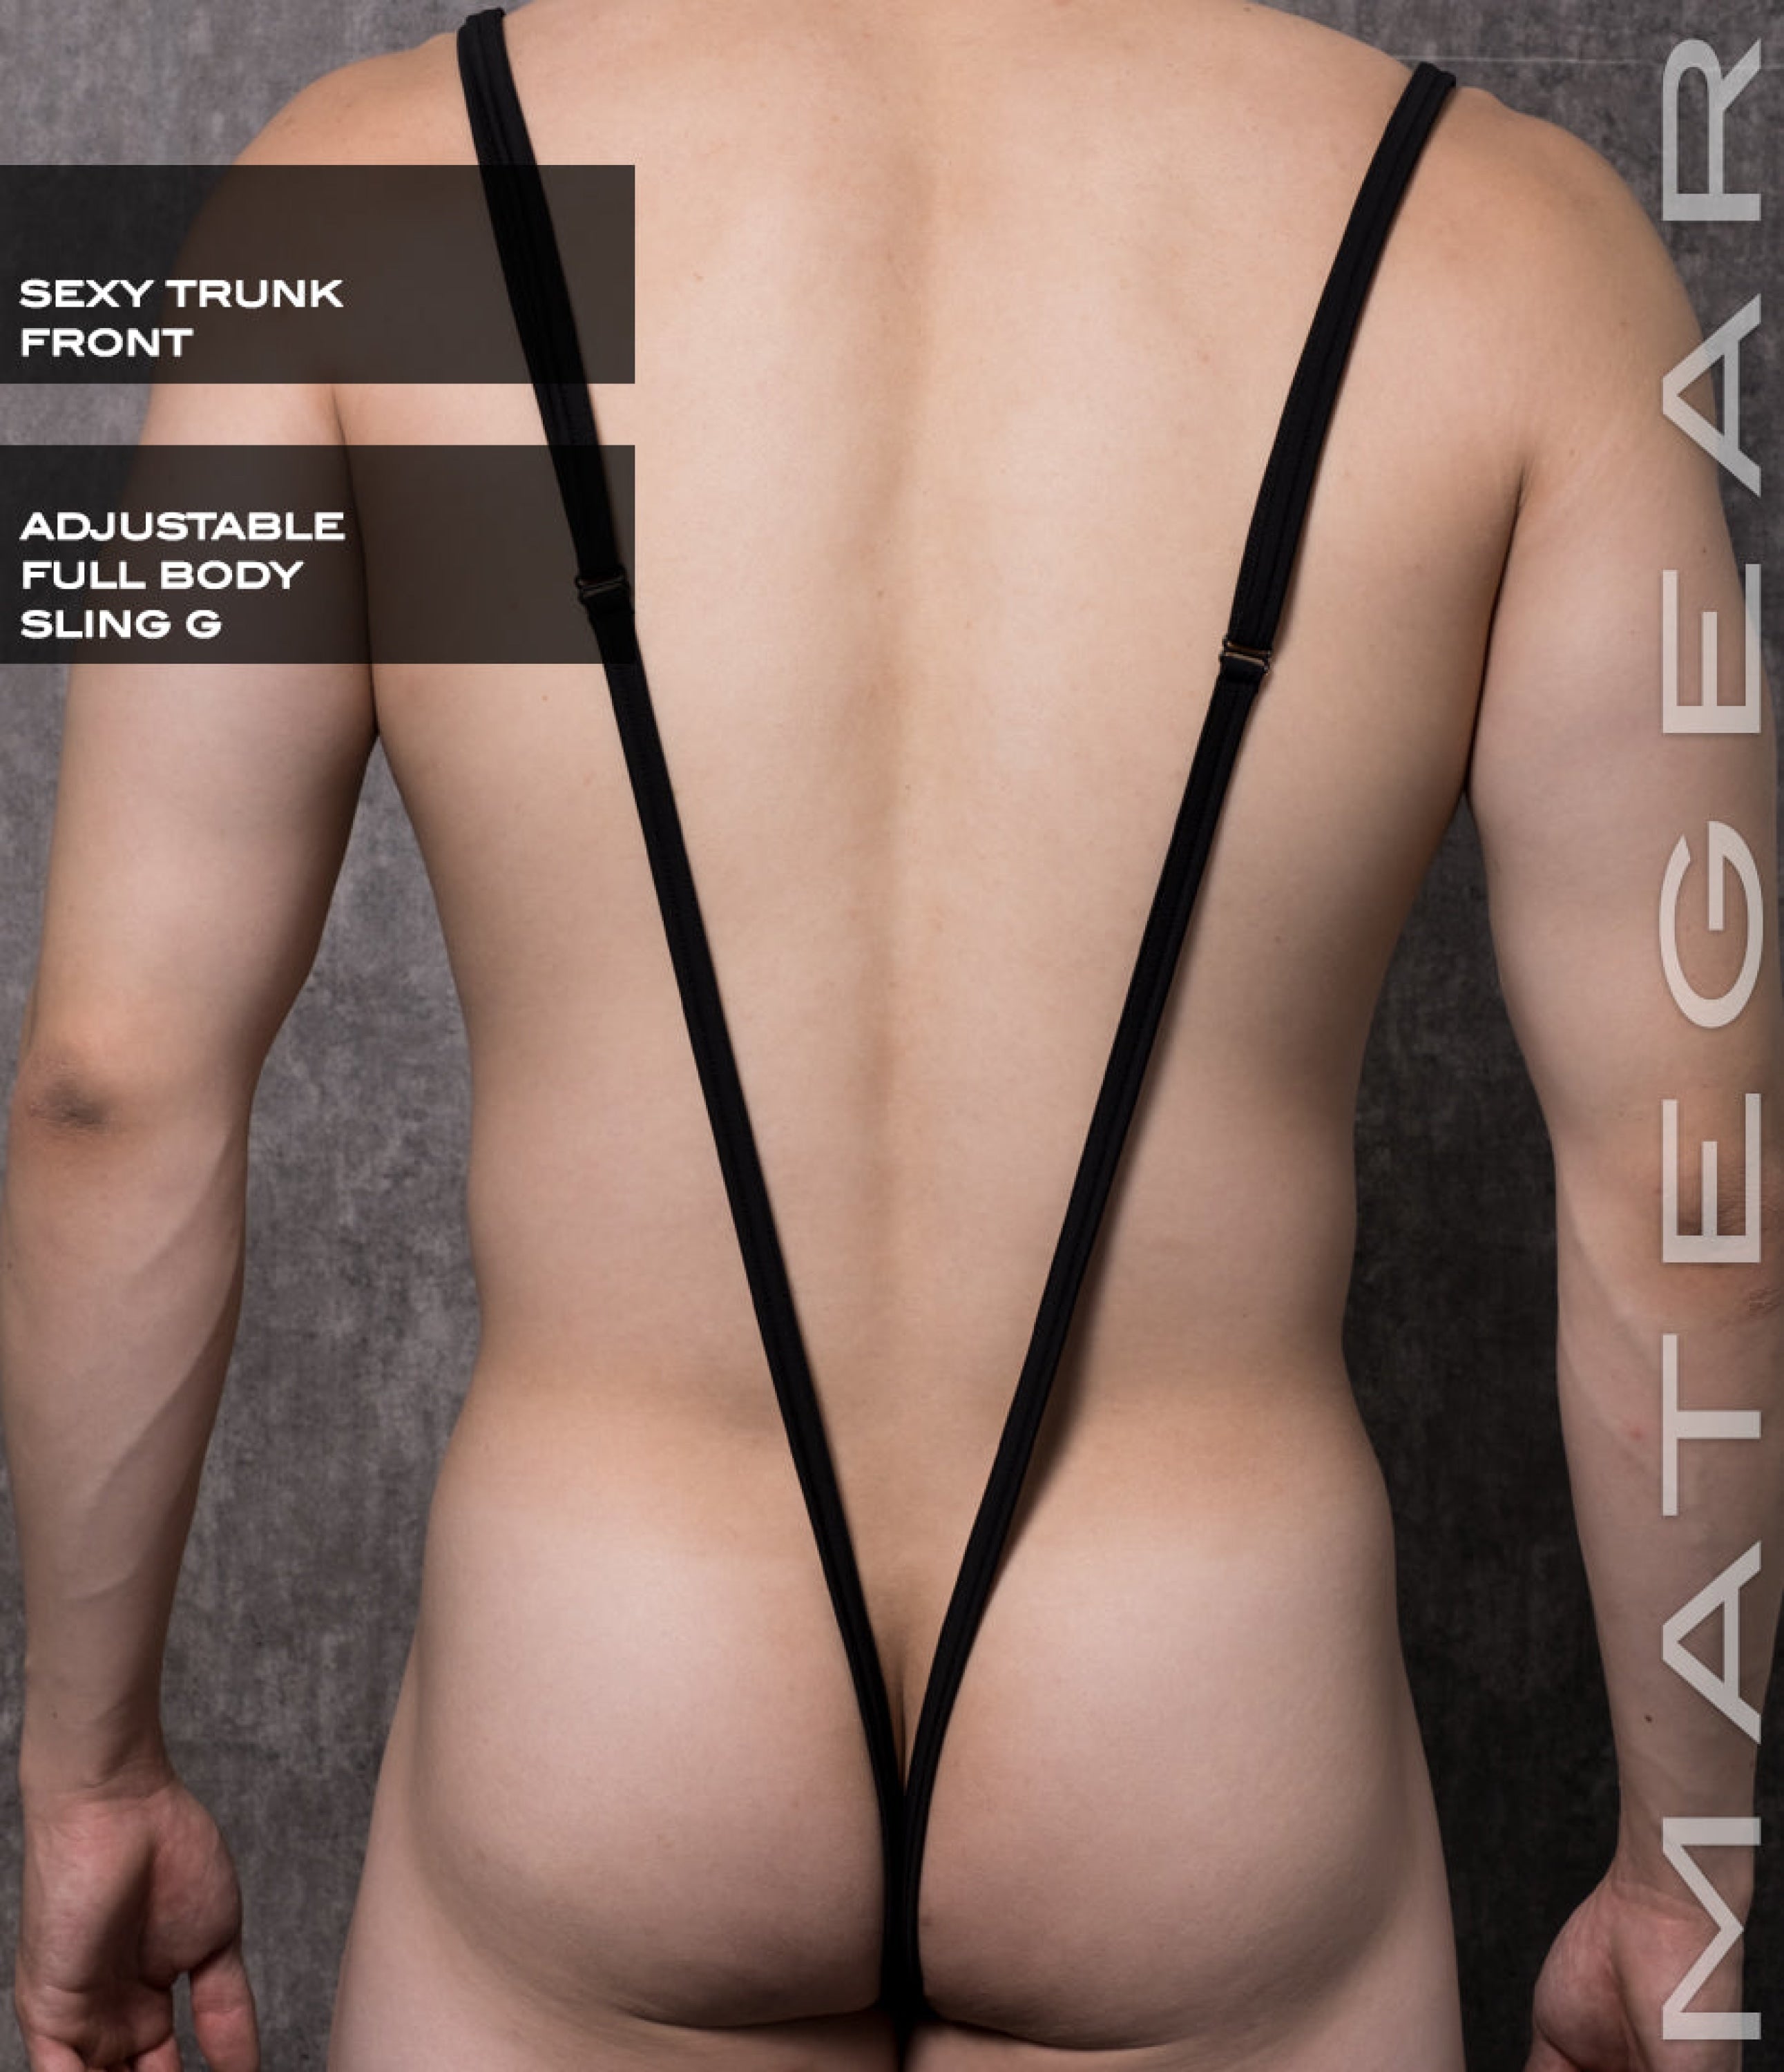 Sexy Mens Underwear Xpression Ultra G - Gal Dae (Adjustable Sling / Trunk Front Black Full Body